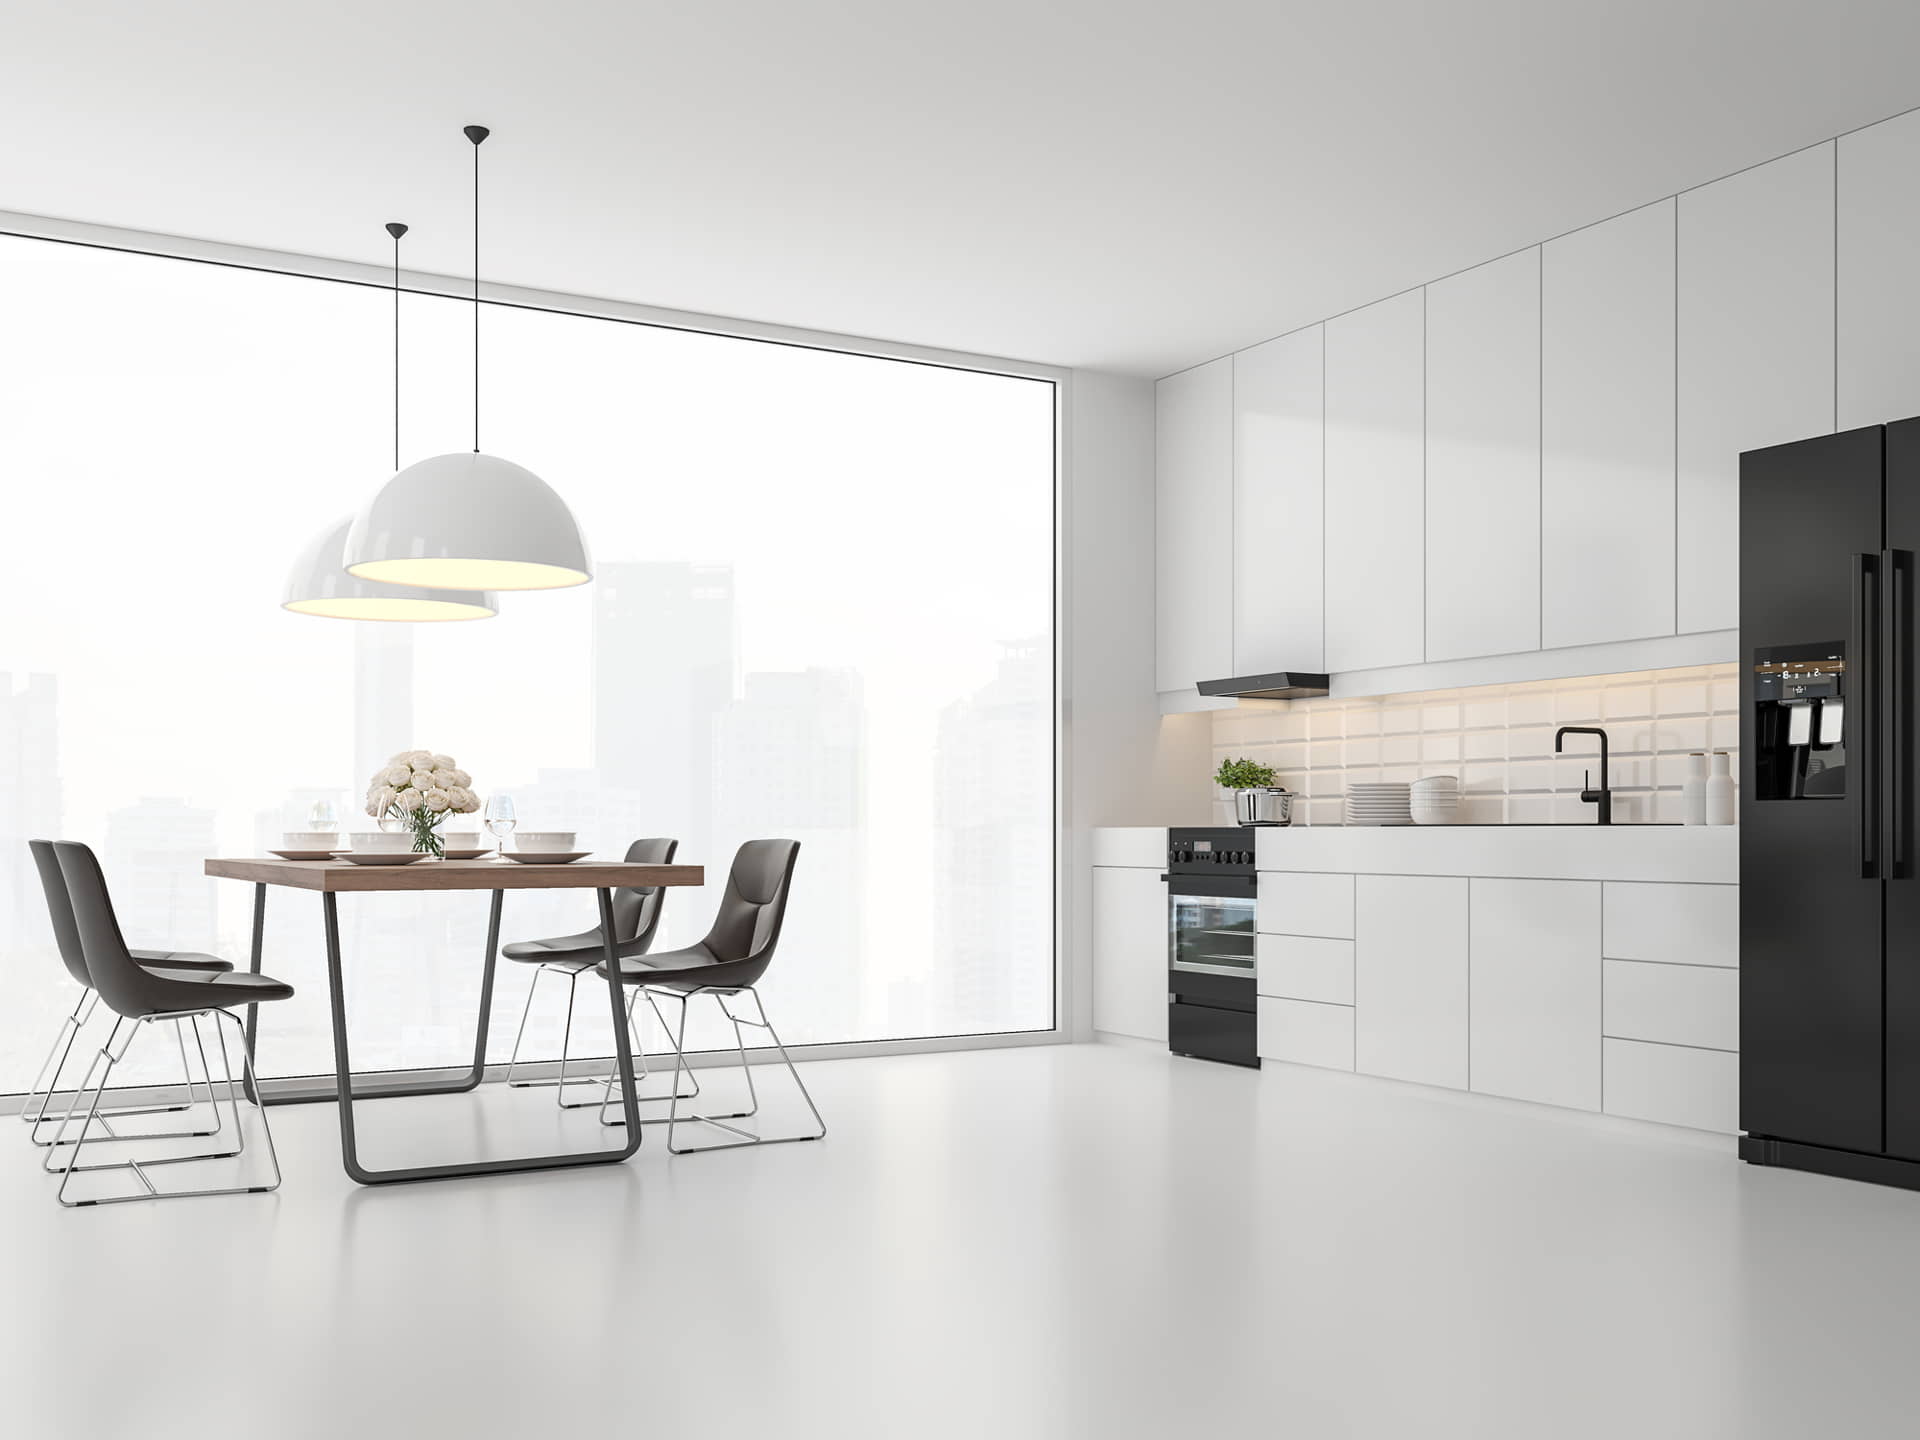 Modern, gile kitchen with a white microcement floor